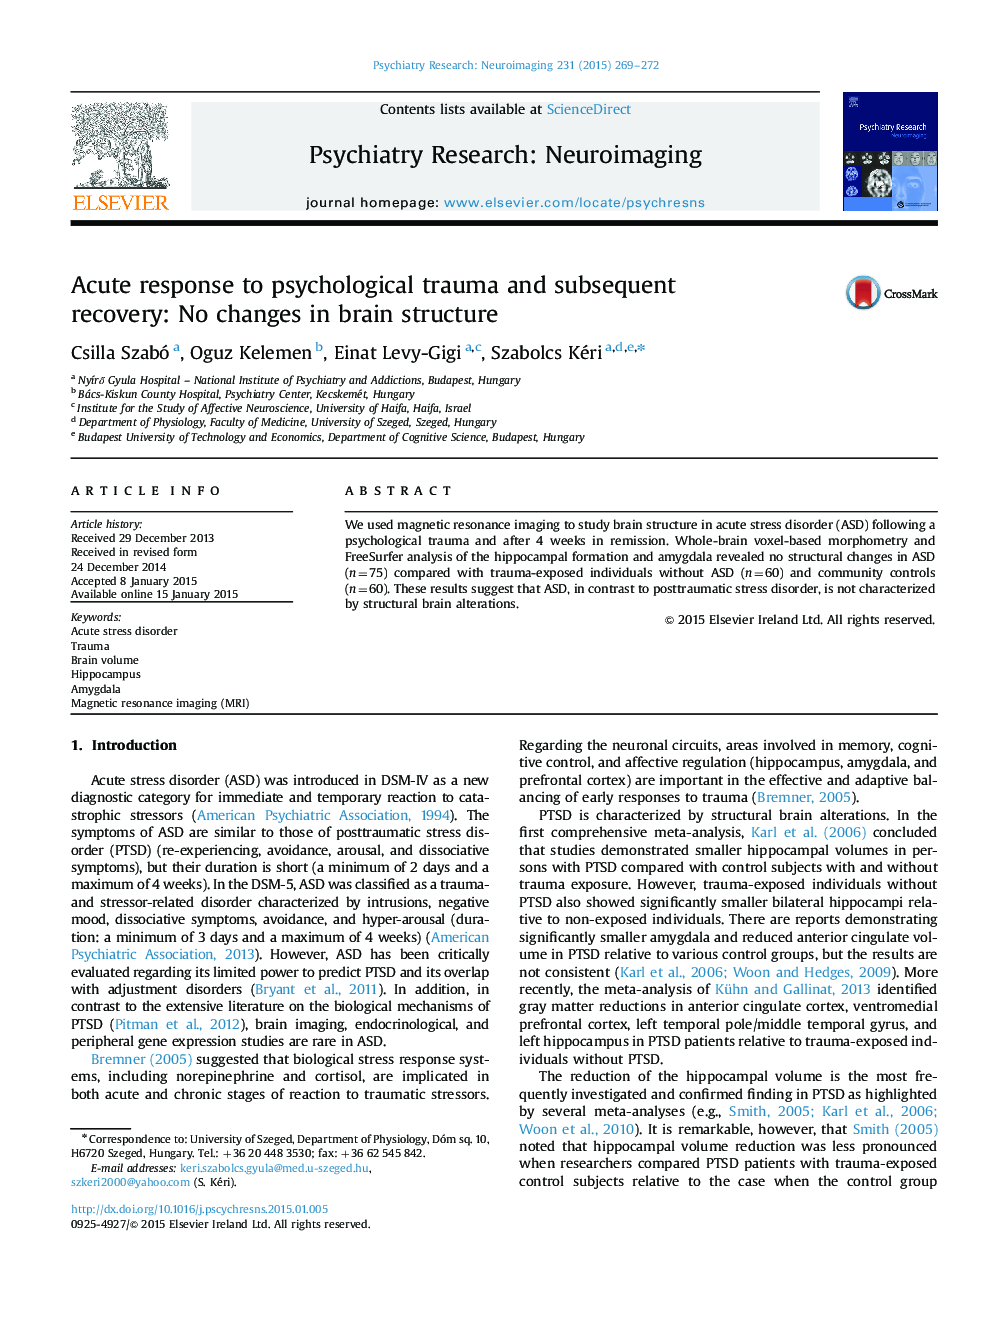 Acute response to psychological trauma and subsequent recovery: No changes in brain structure